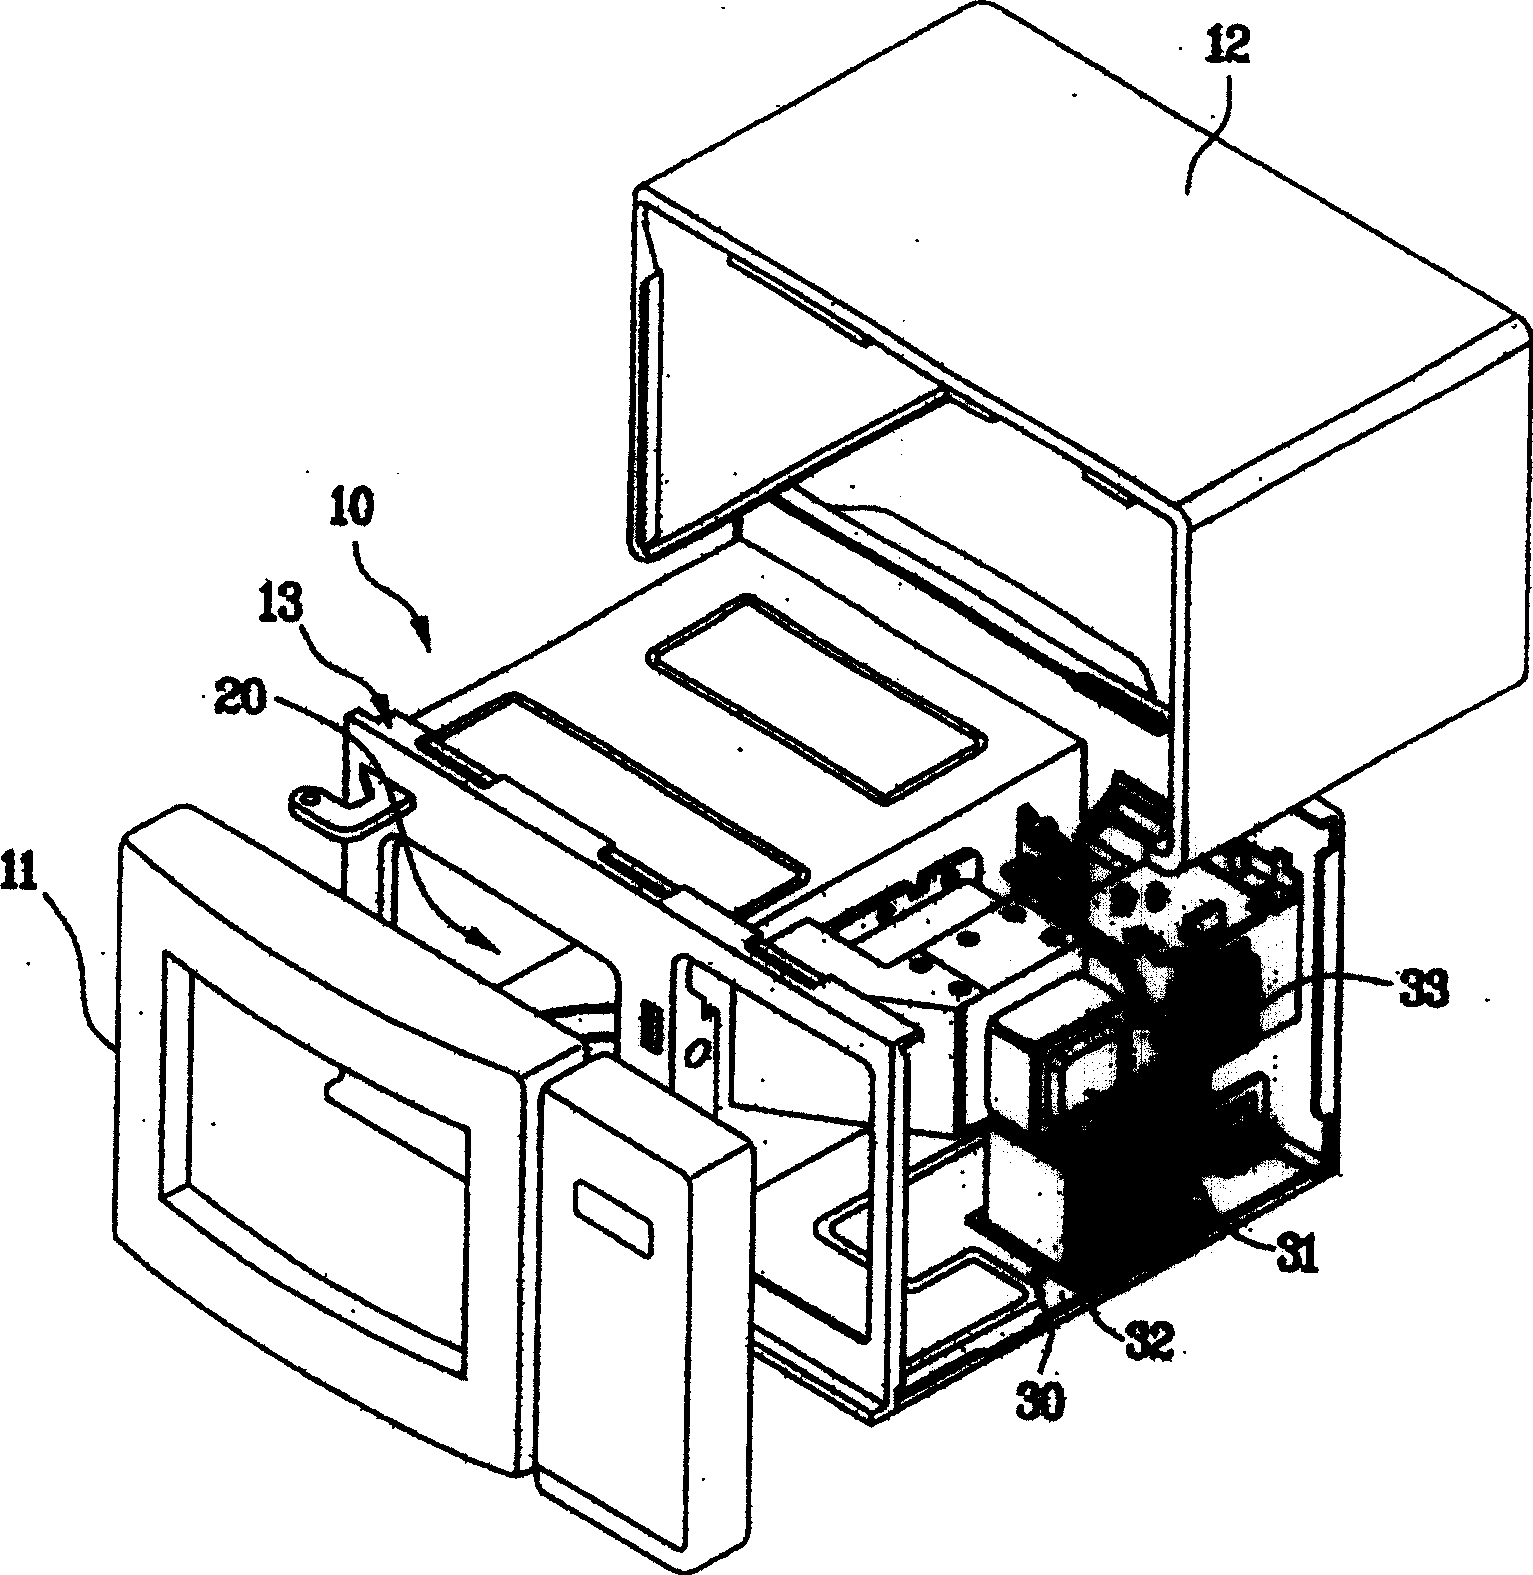 A multifunctional auxiliary container for microwave ovens